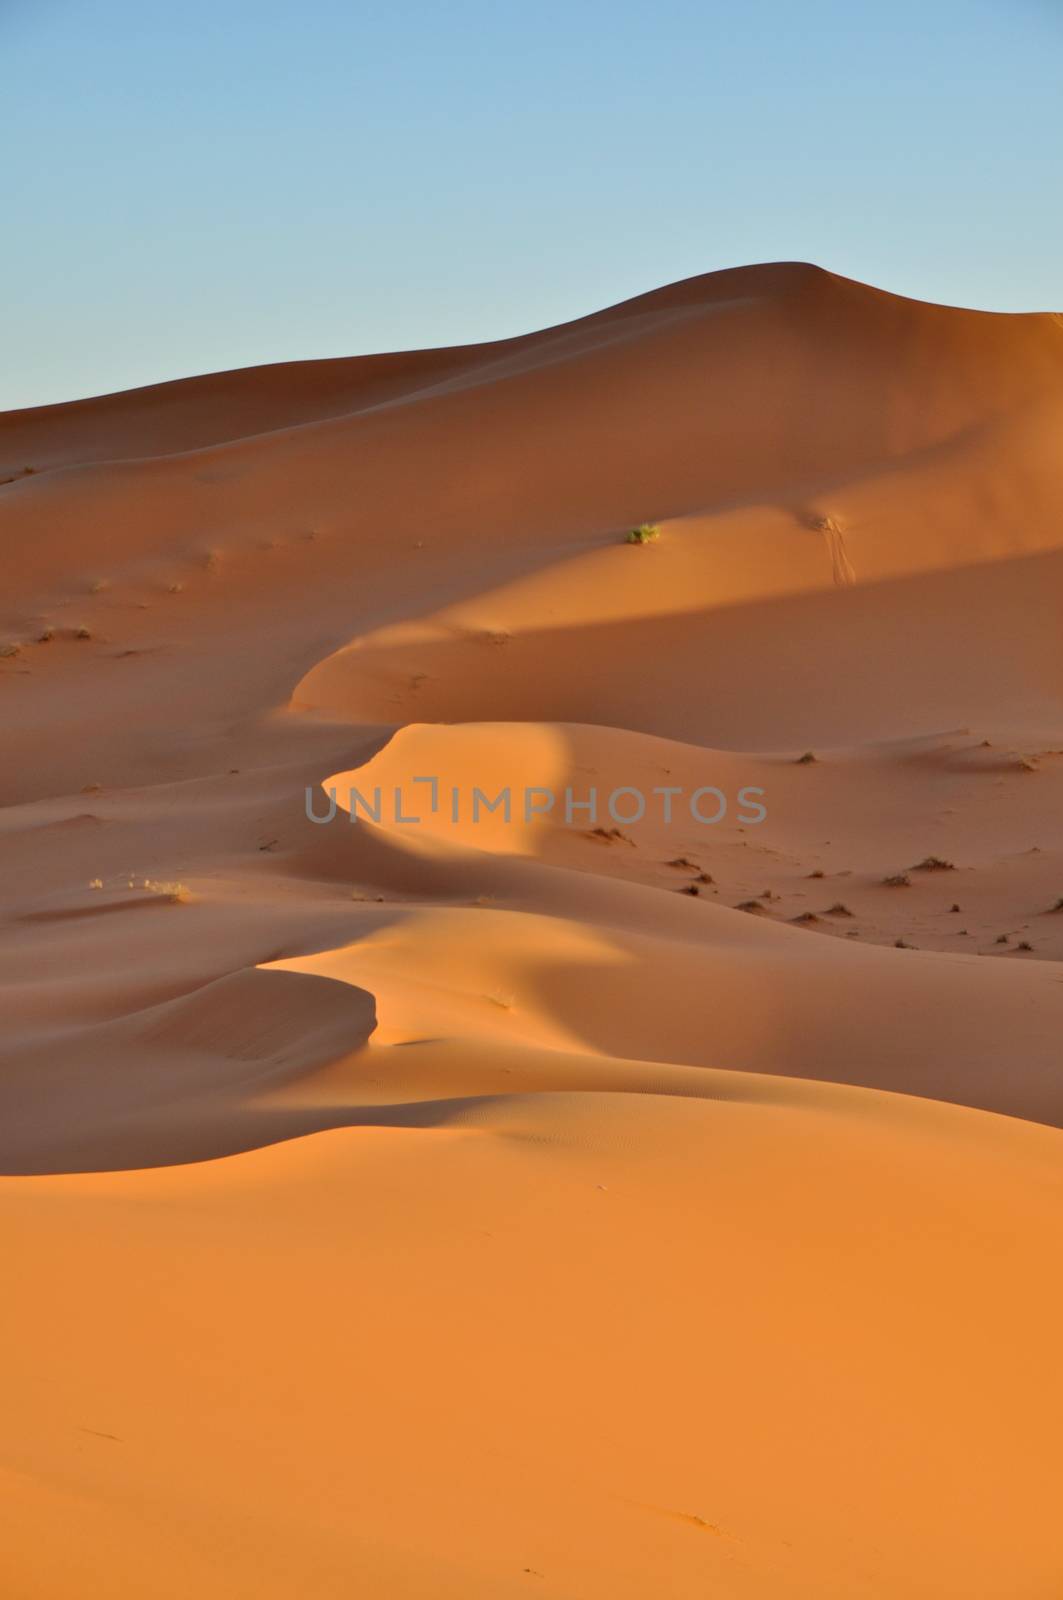 Merzouga desert in Morocco by anderm